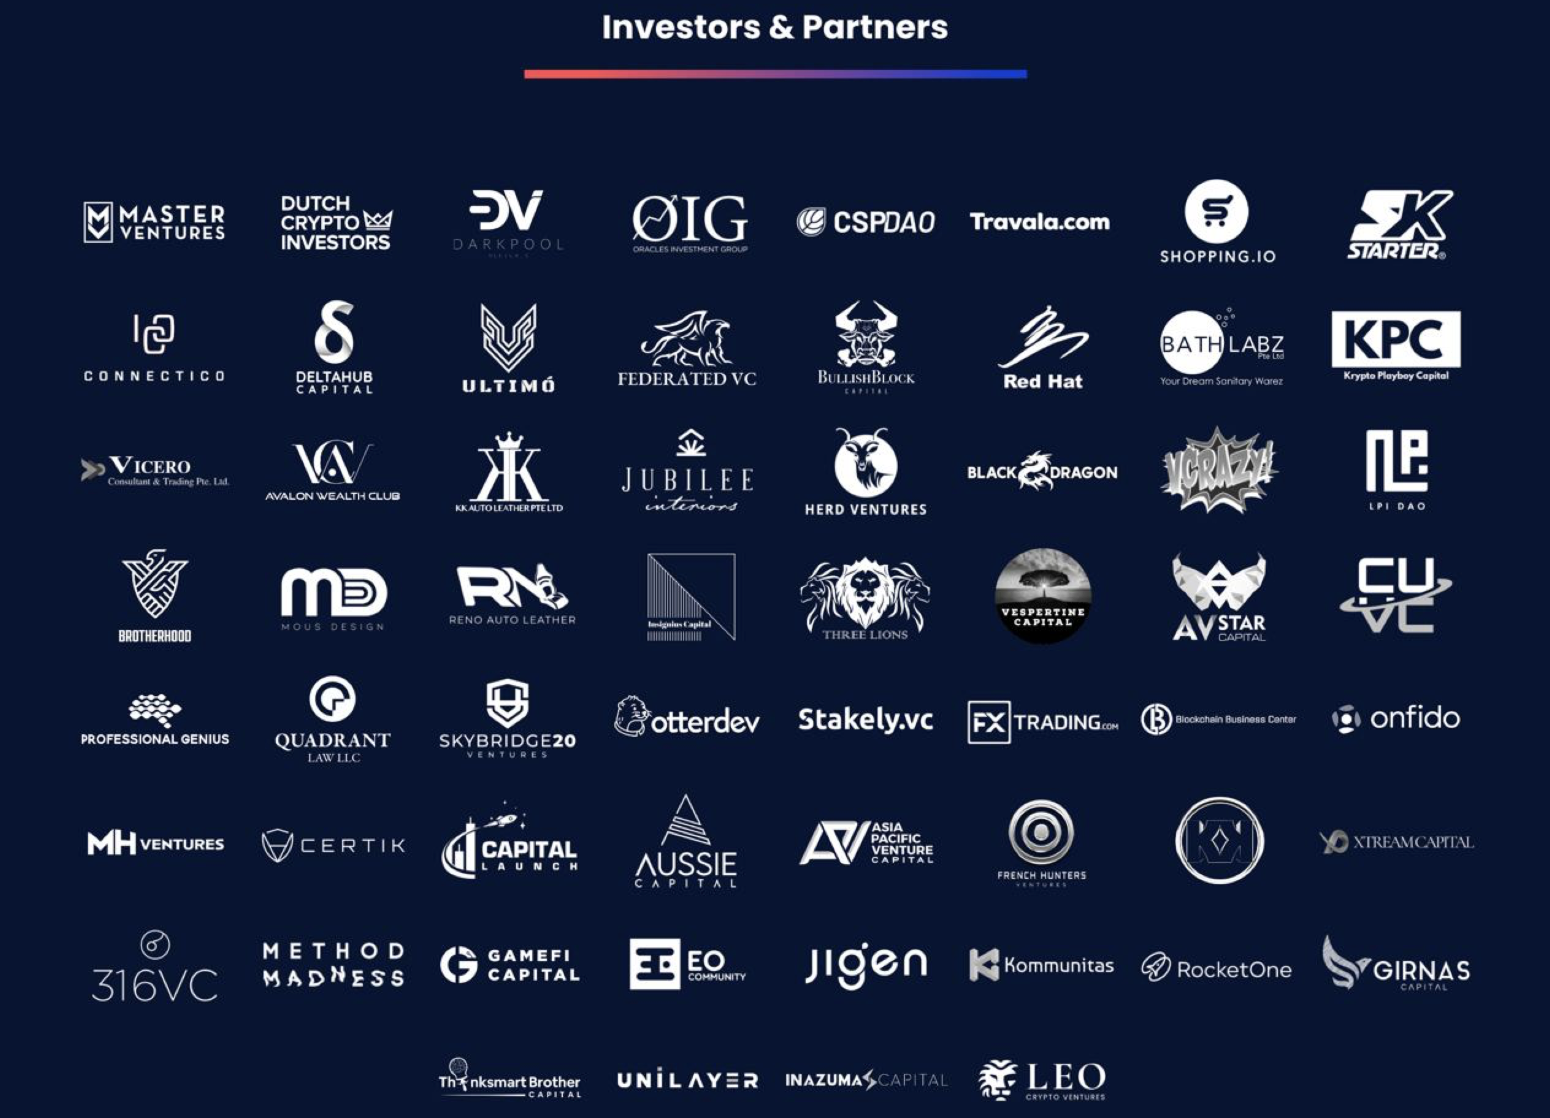 Affyn Investors and Partners